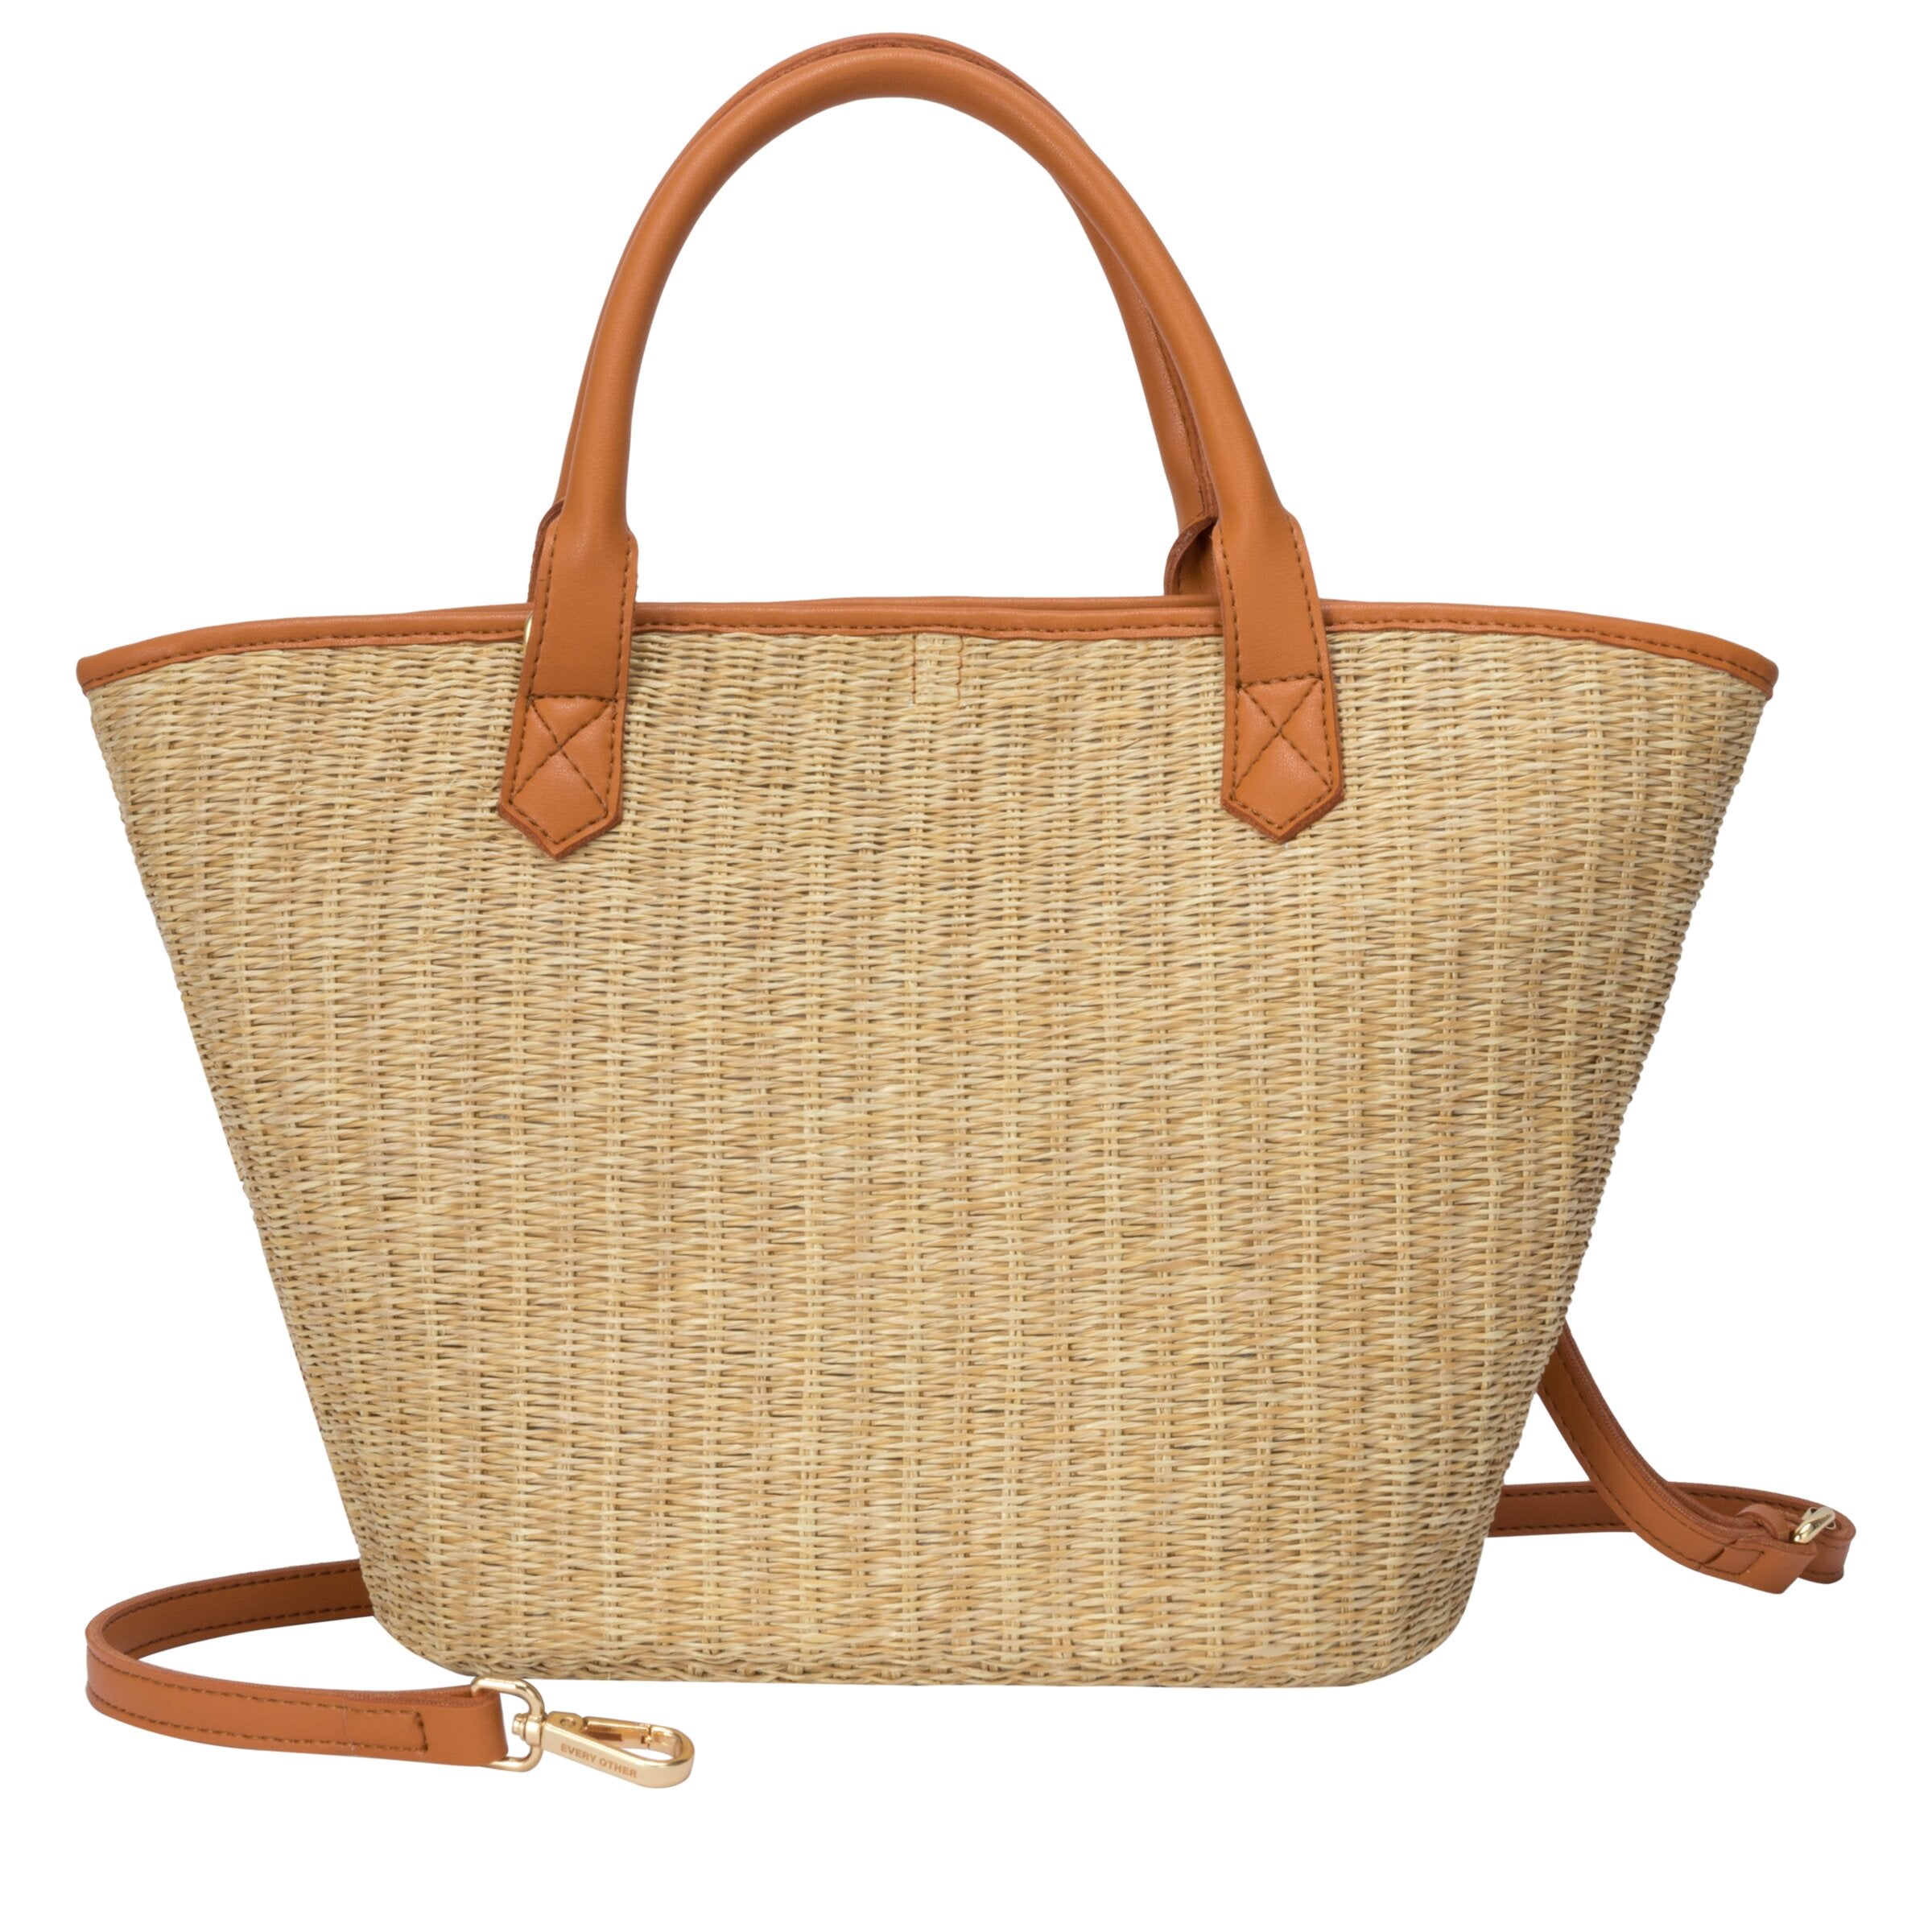 Every Other Large Twin Strap Tote Bag - Tan